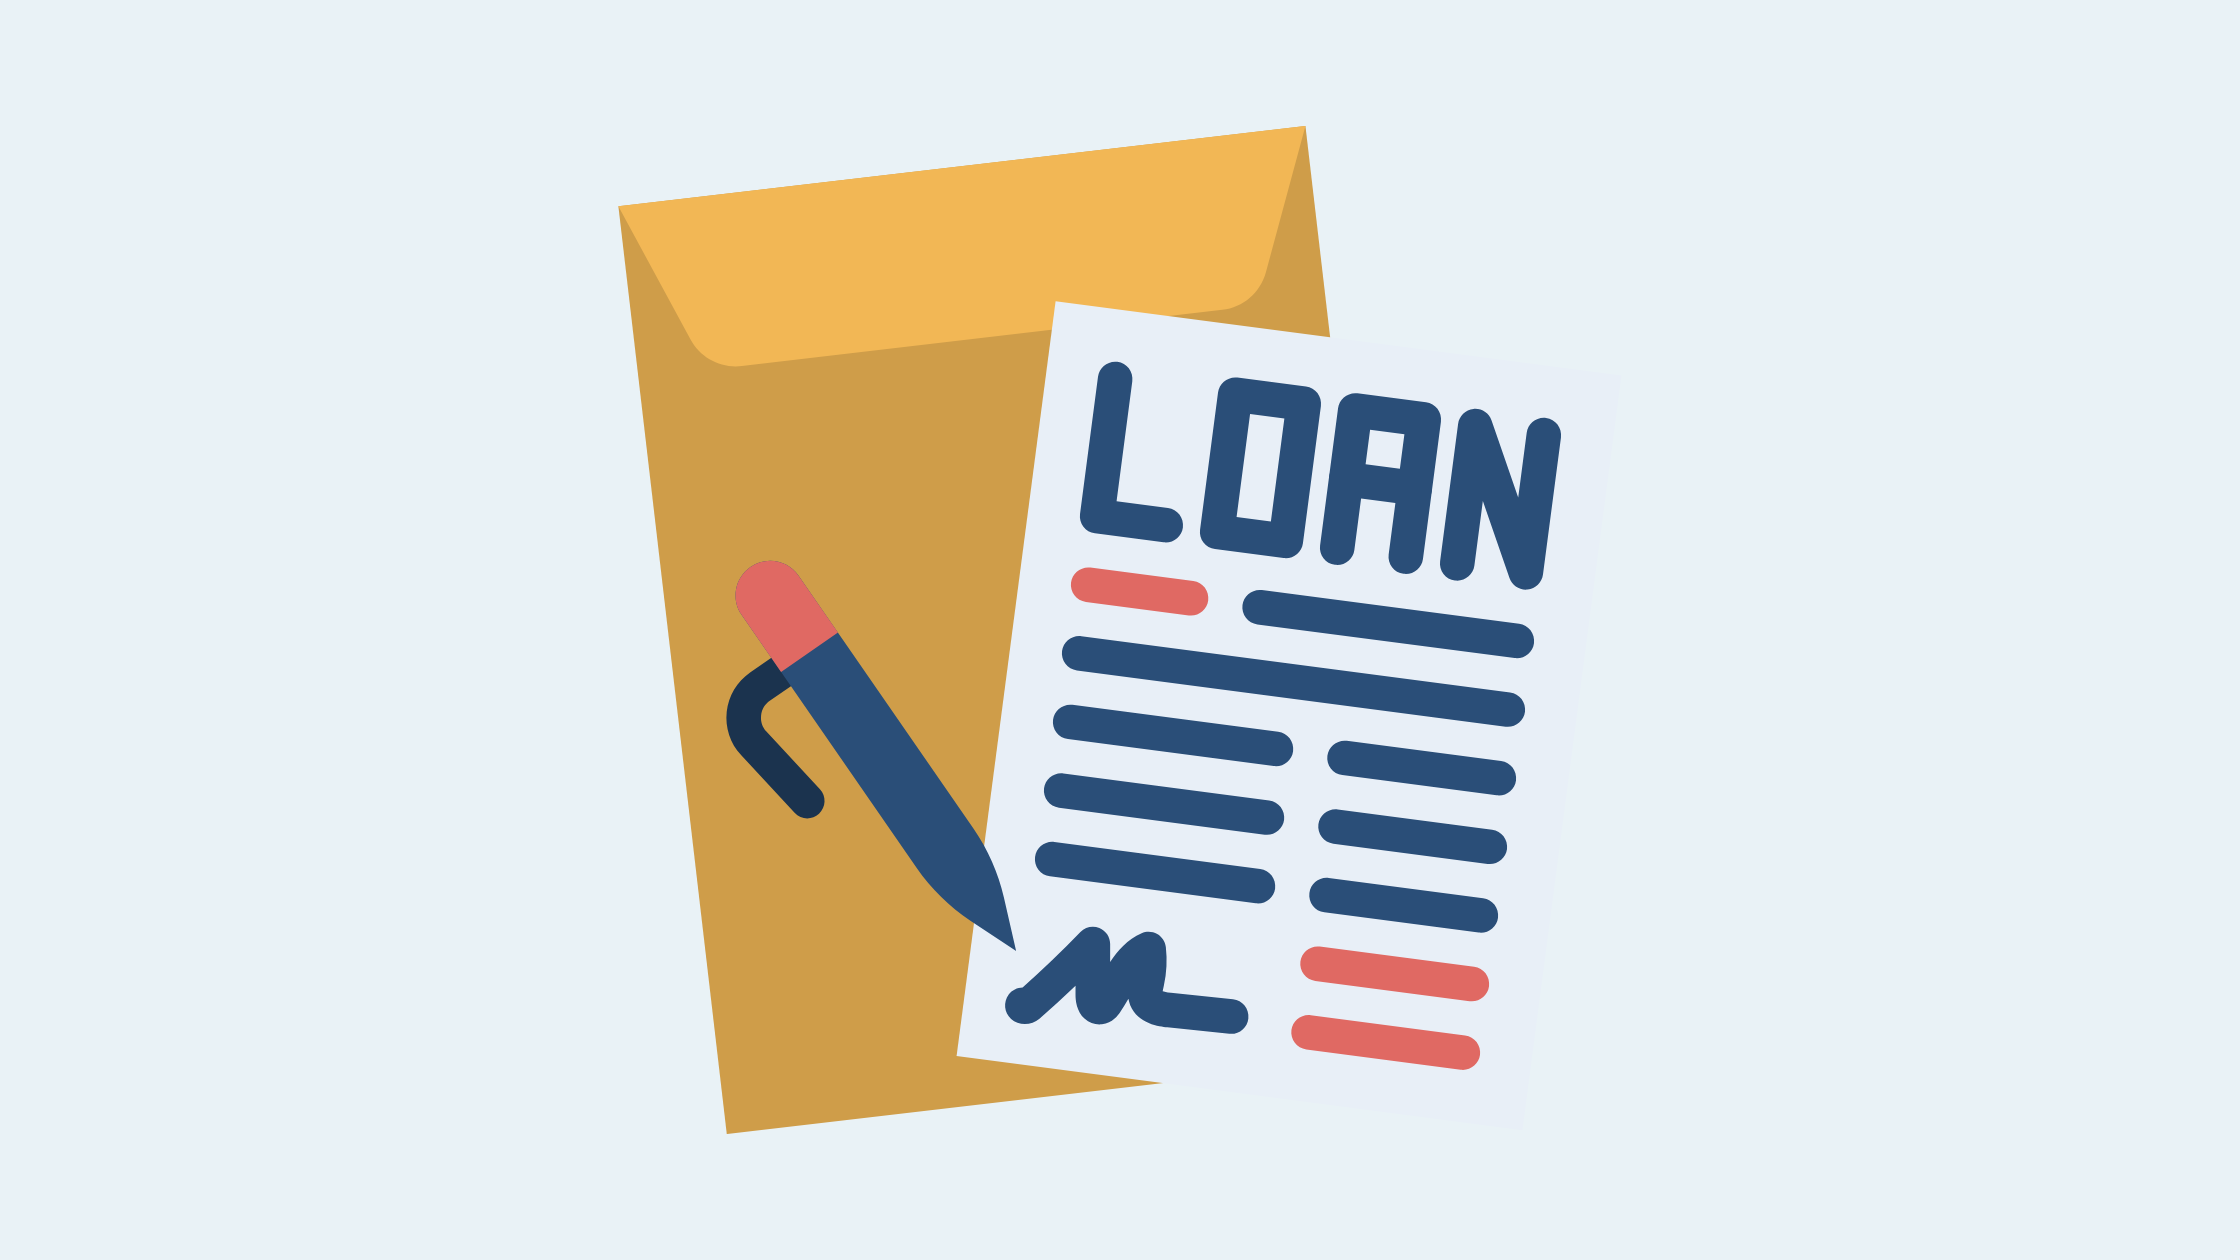 Everything you need to know about business loan rates on Jonathan Mills Patrick dot com